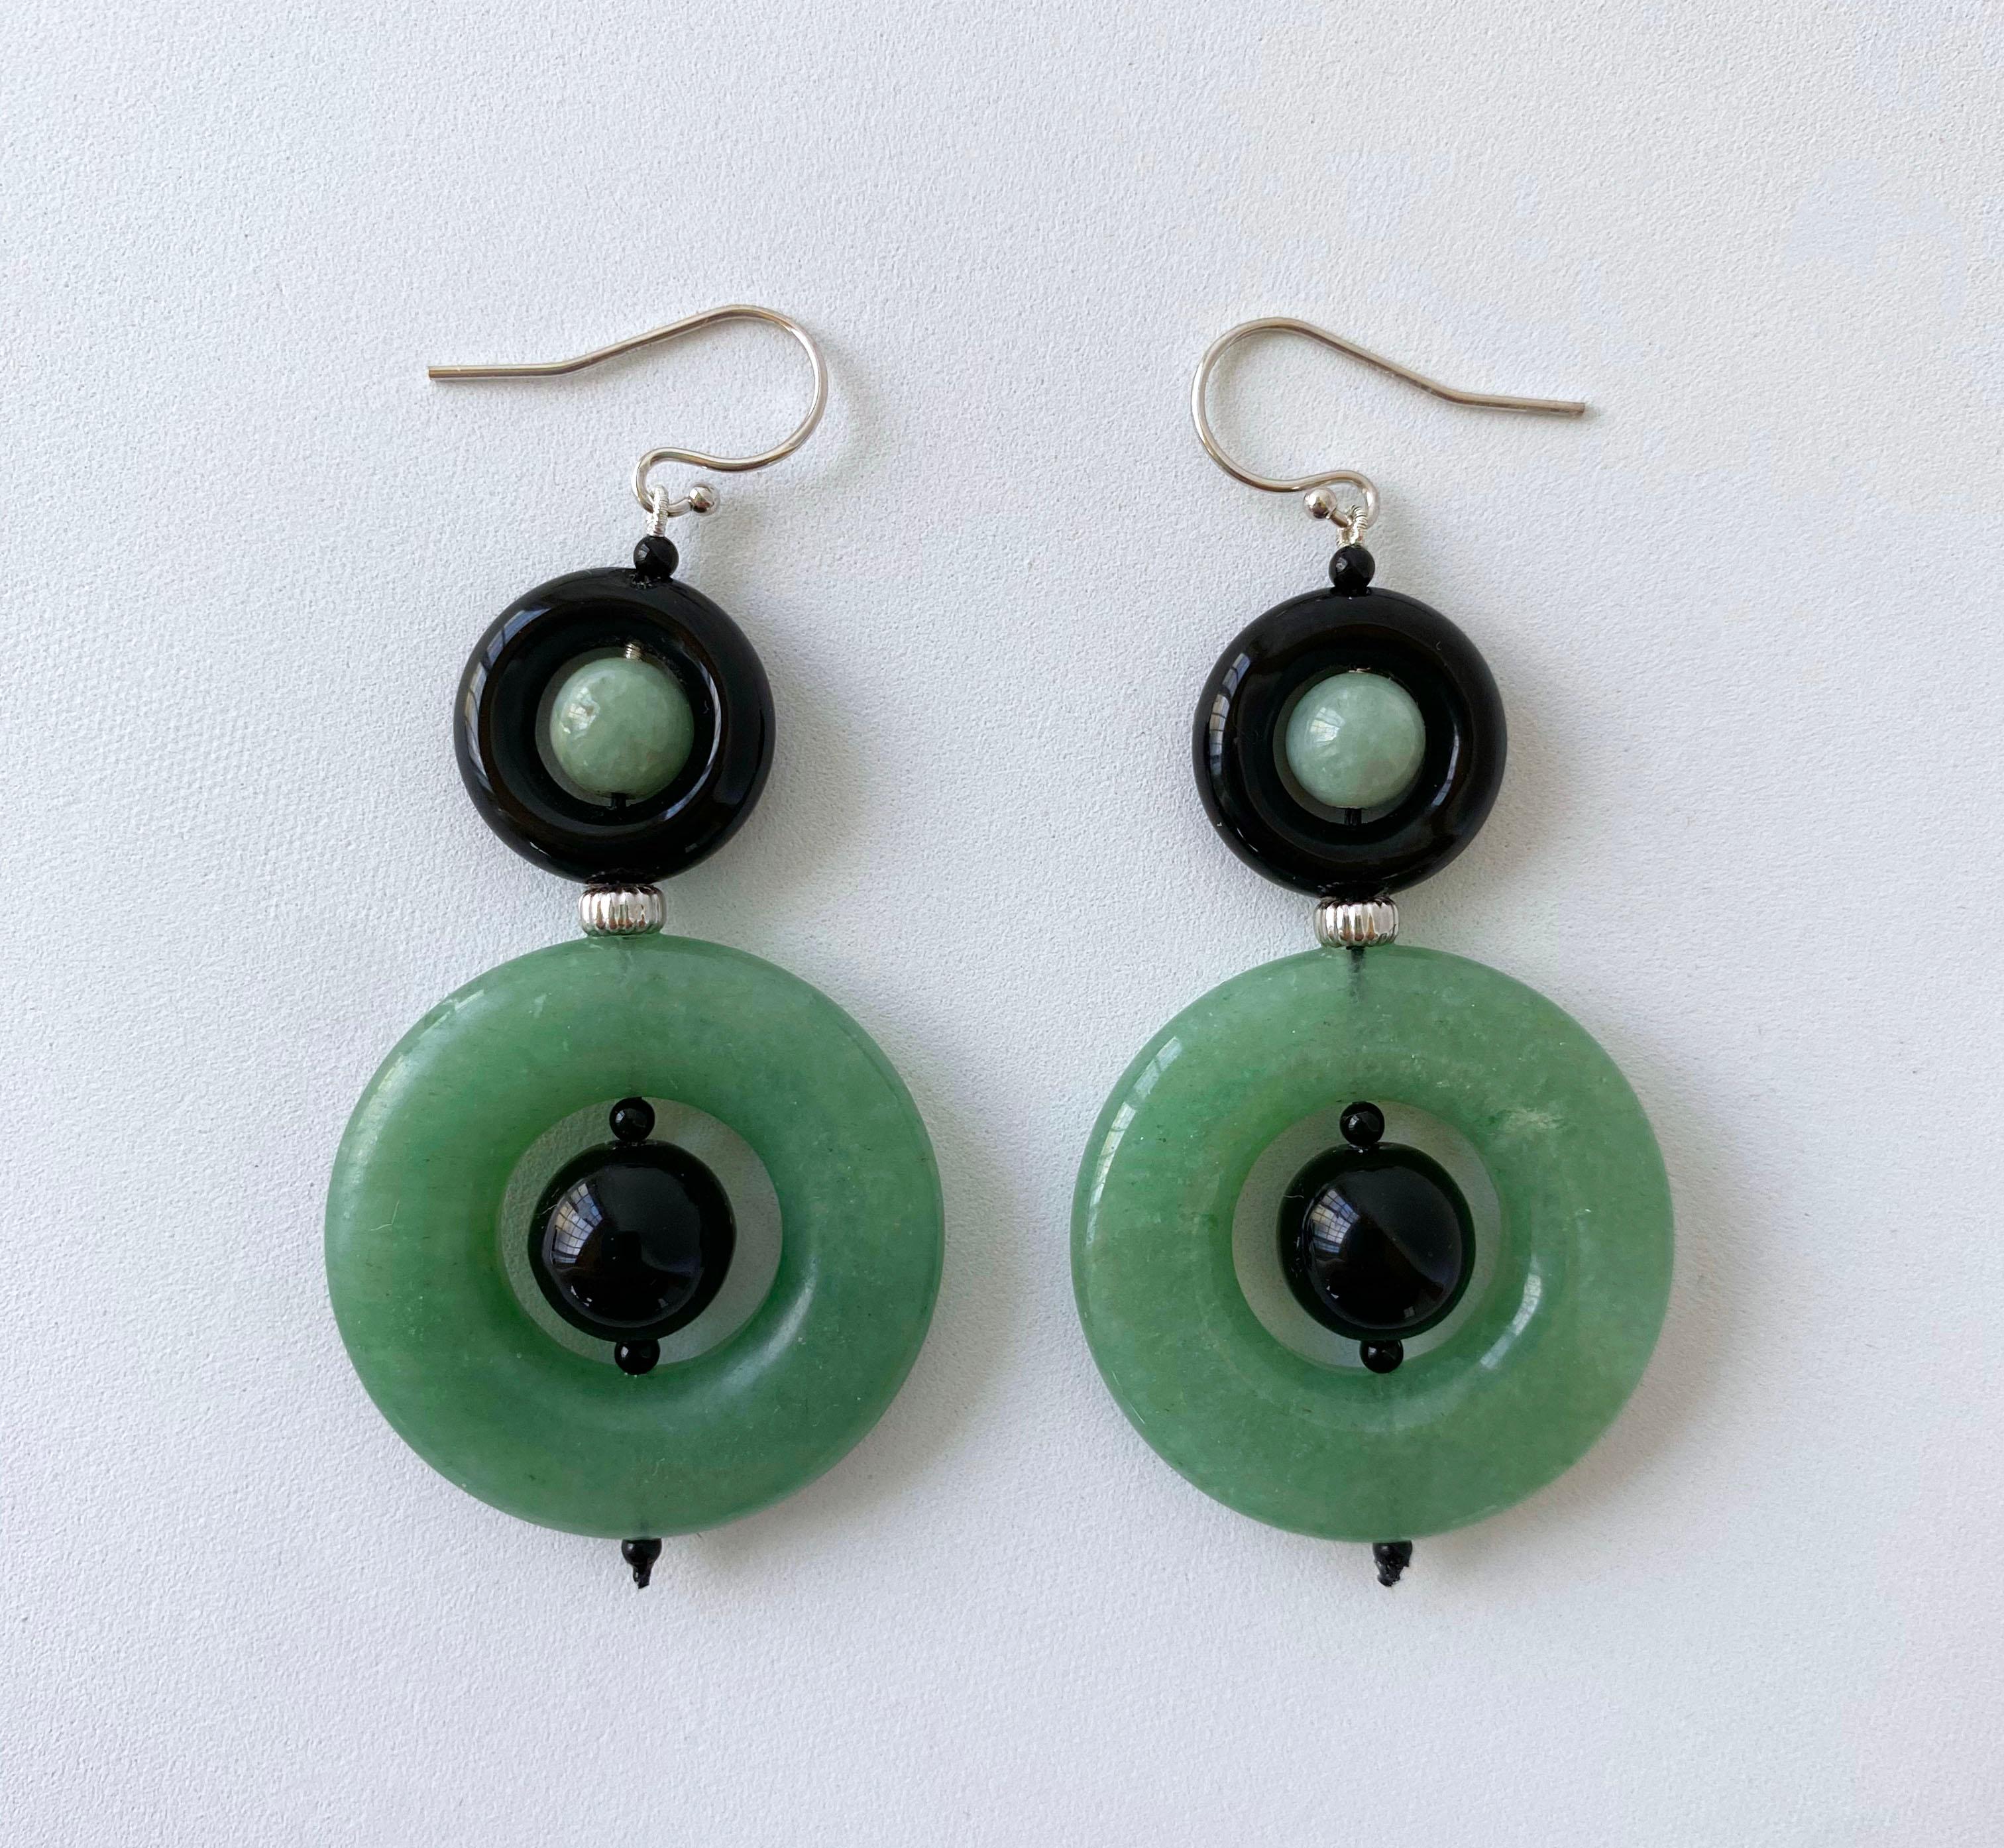 Gorgeous pair of Earrings by Marina J. This pair is made using all solid 14k White Gold wiring and hooks. A small round Jade bead sits within a high gloss Black Onyx Donut from which a larger Jade Donut & Black Onyx bead hang. A solid 14k White Gold